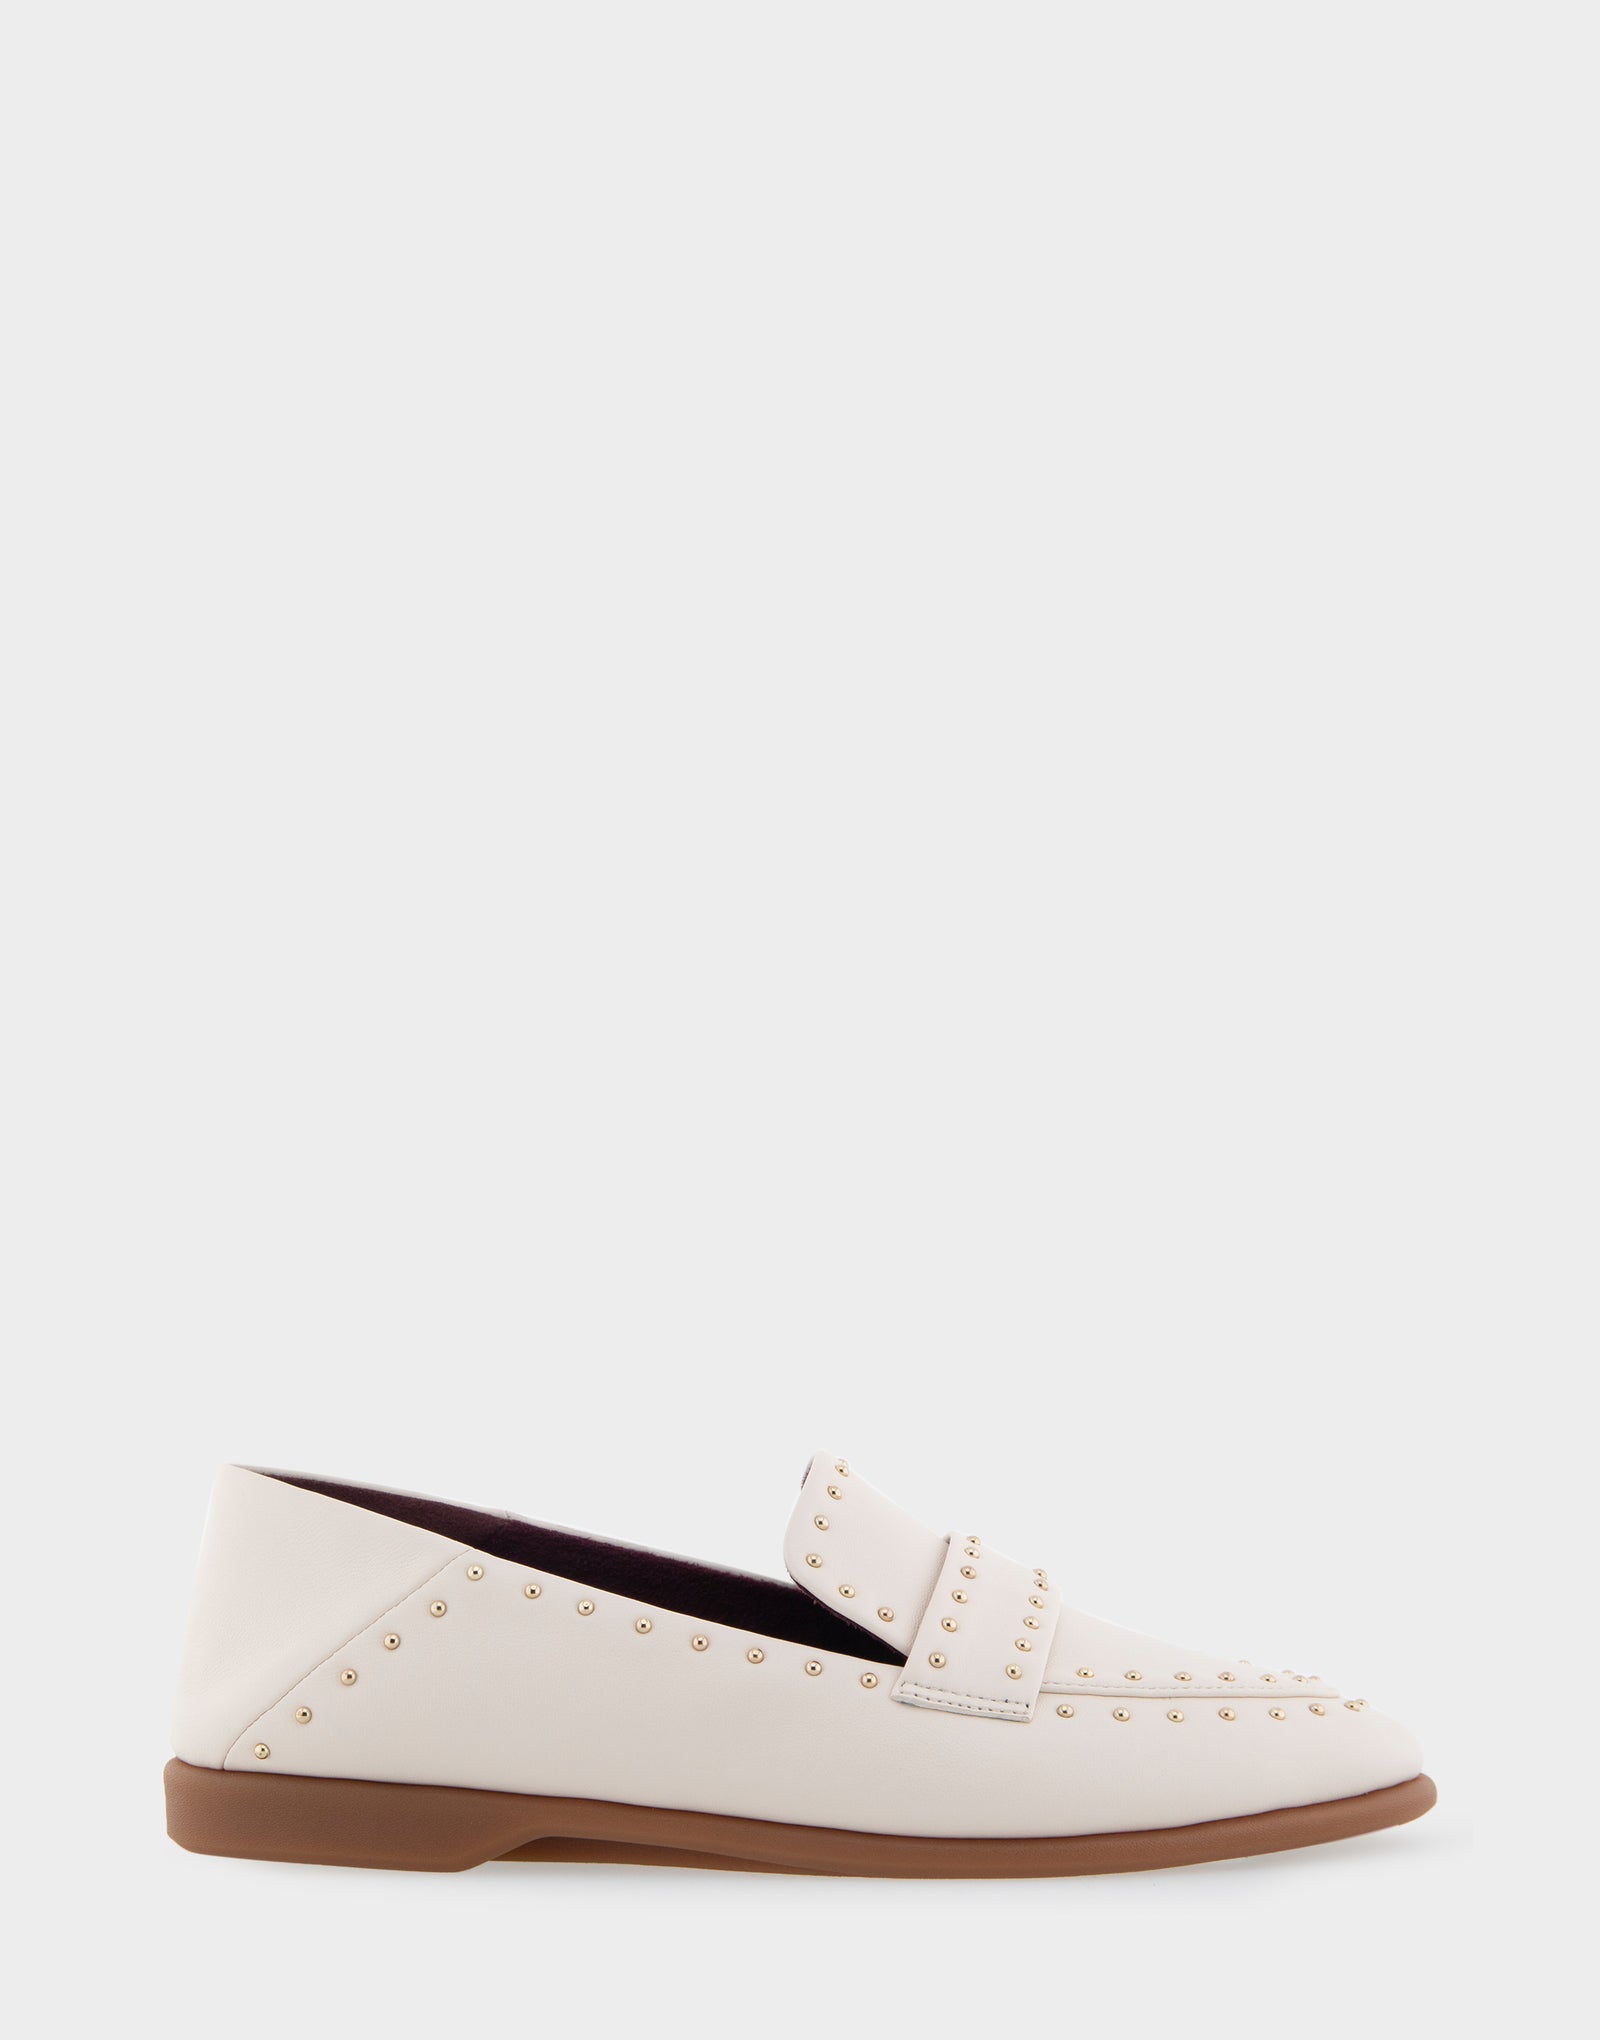 Women's Convertible Loafer in Off White